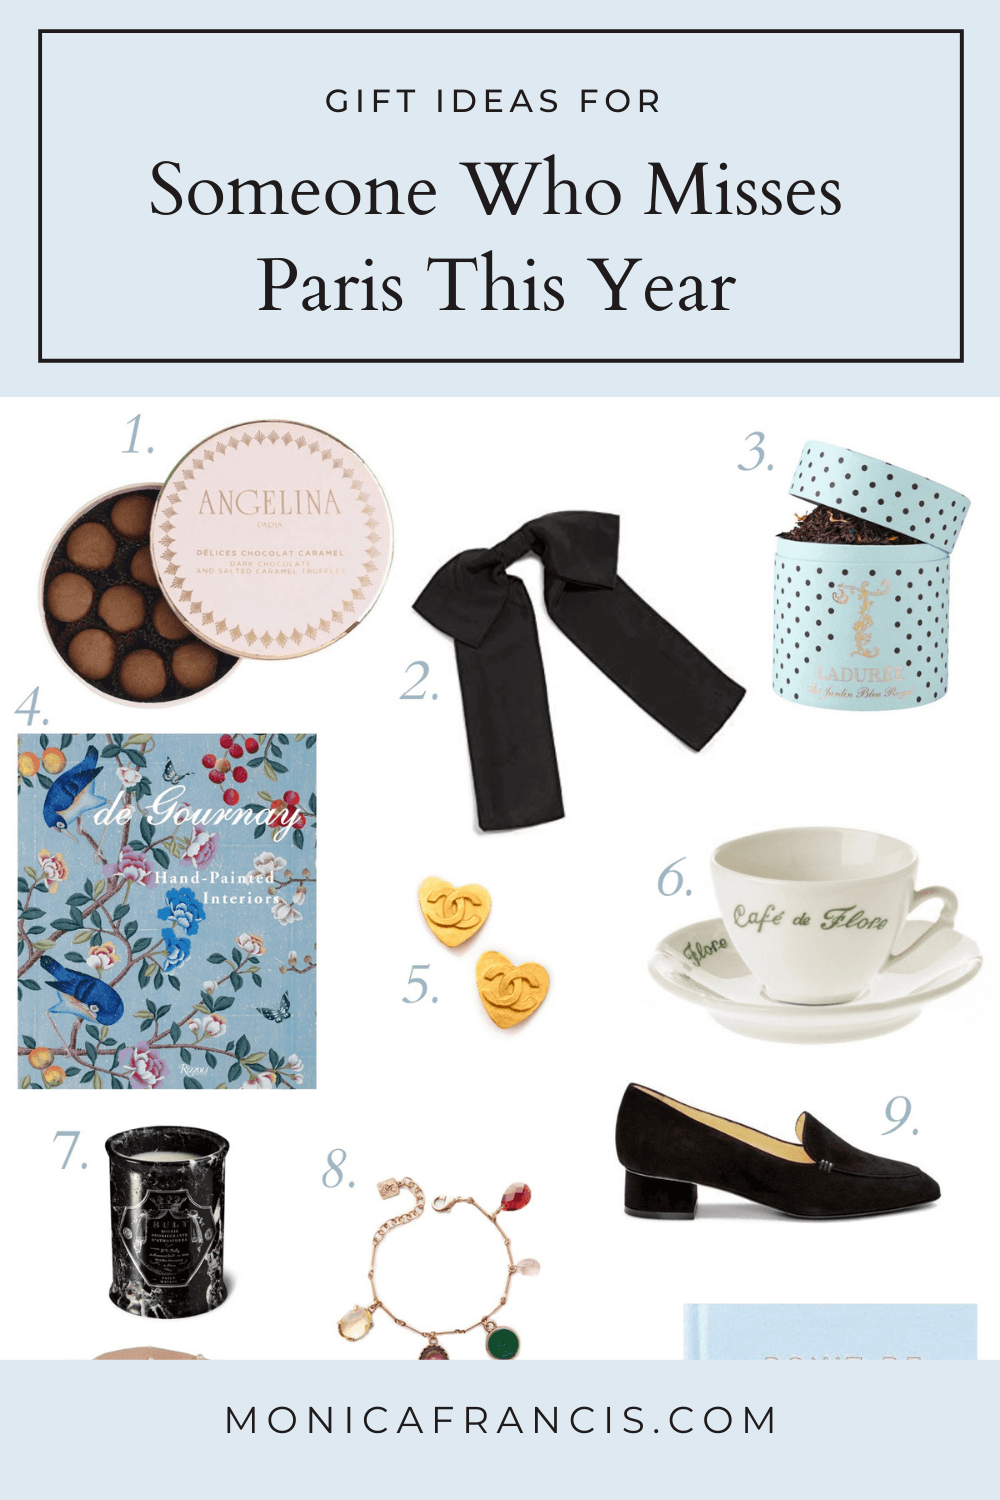 12 Holiday Gift Ideas for People Who Miss Paris This Year | While we can’t travel to France right now, francophiles and Paris lovers around the world are still dreaming of the City of Light. These Paris-inspired gifts will bring a touch of that famo…